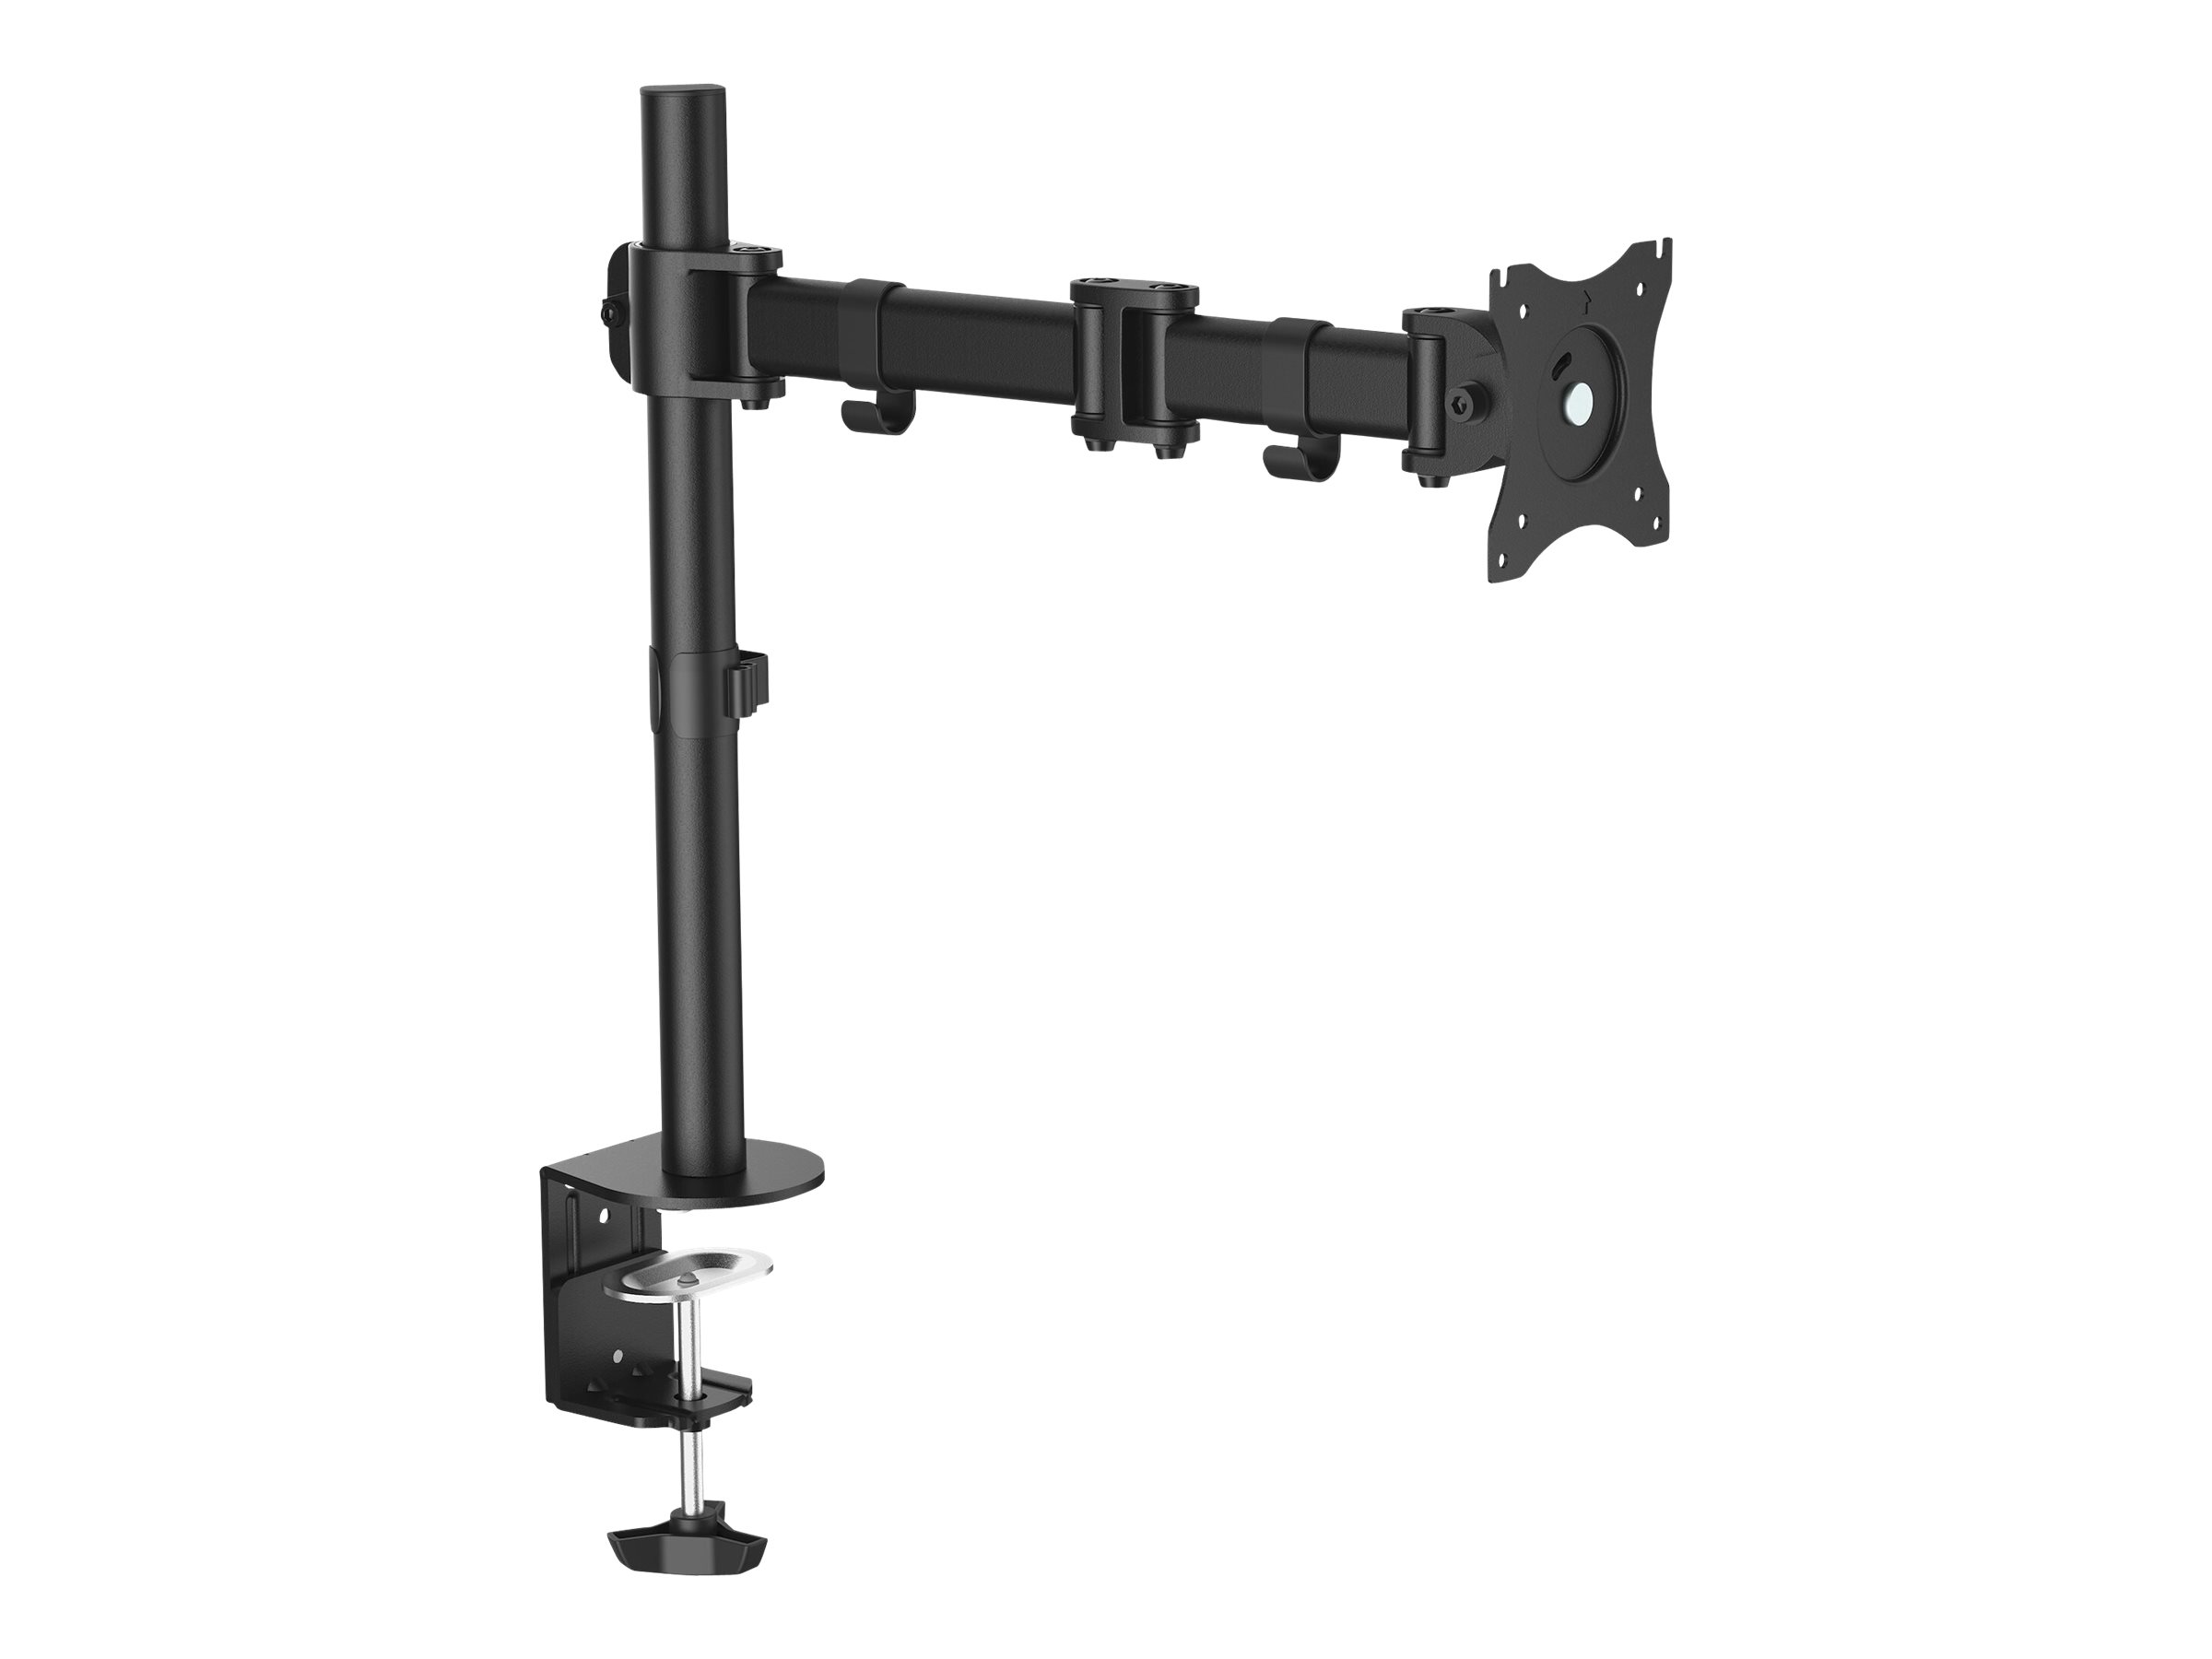 StarTech.com Desk Mount Monitor Arm for up to 34" VESA Compatible Displays, Articulating Pole Mount with Single Monitor Arm, Ergonomic Height Adjustable, Desk Clamp or Grommet, Black - Small Footprint Design (ARMPIVOTB)